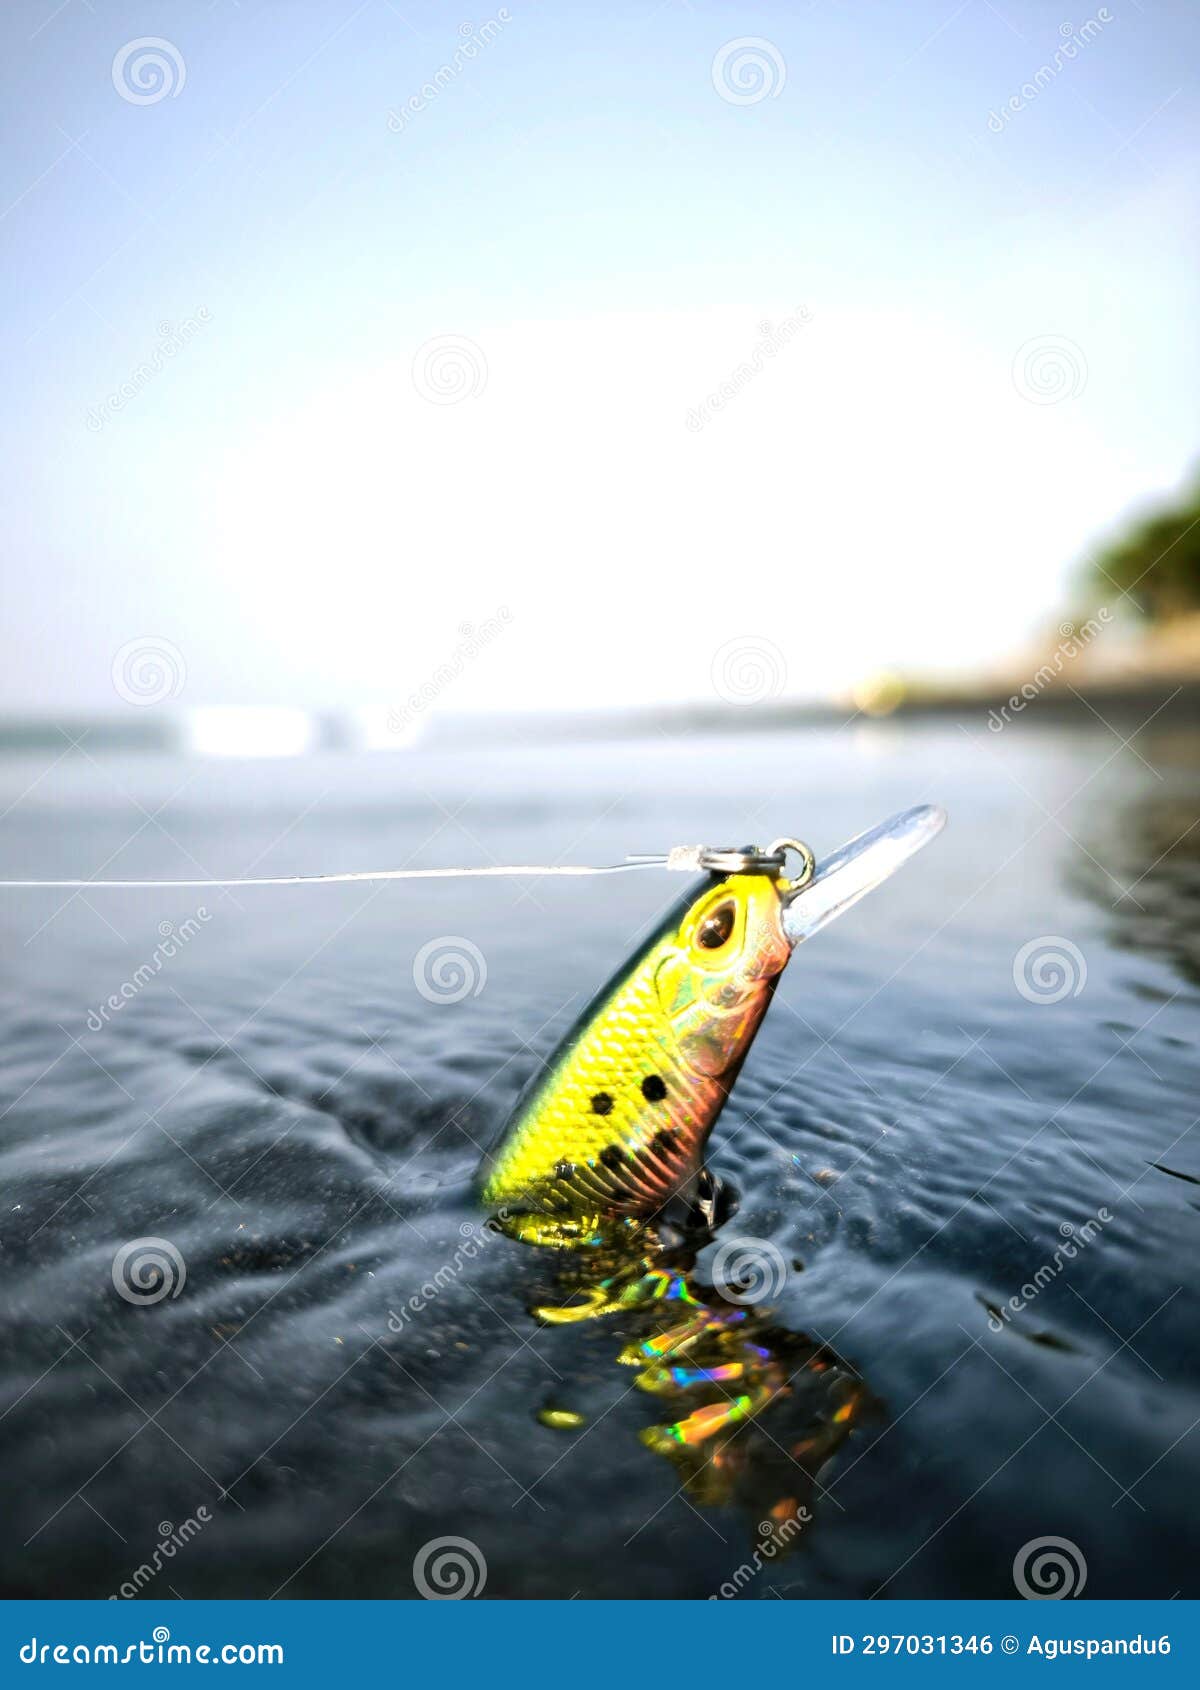 https://thumbs.dreamstime.com/z/artificial-bait-fishing-called-minow-297031346.jpg